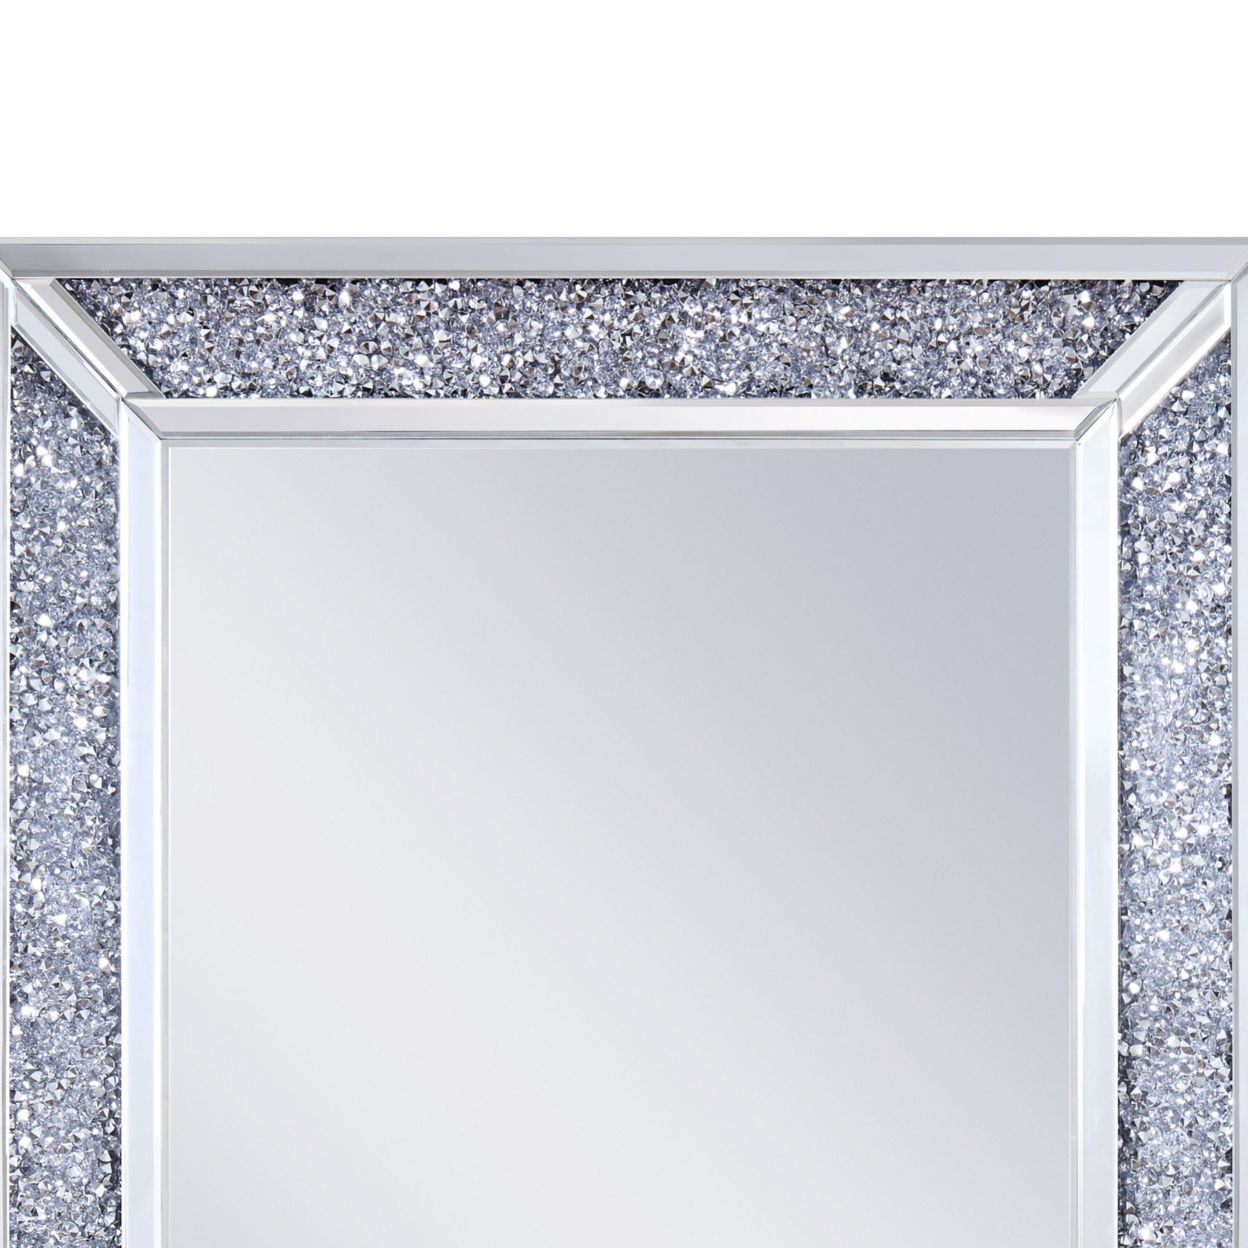 Rectangular Faux Crystal Inlaid Mirrored Wall Decor With Wooden Backing, Clear- Saltoro Sherpi